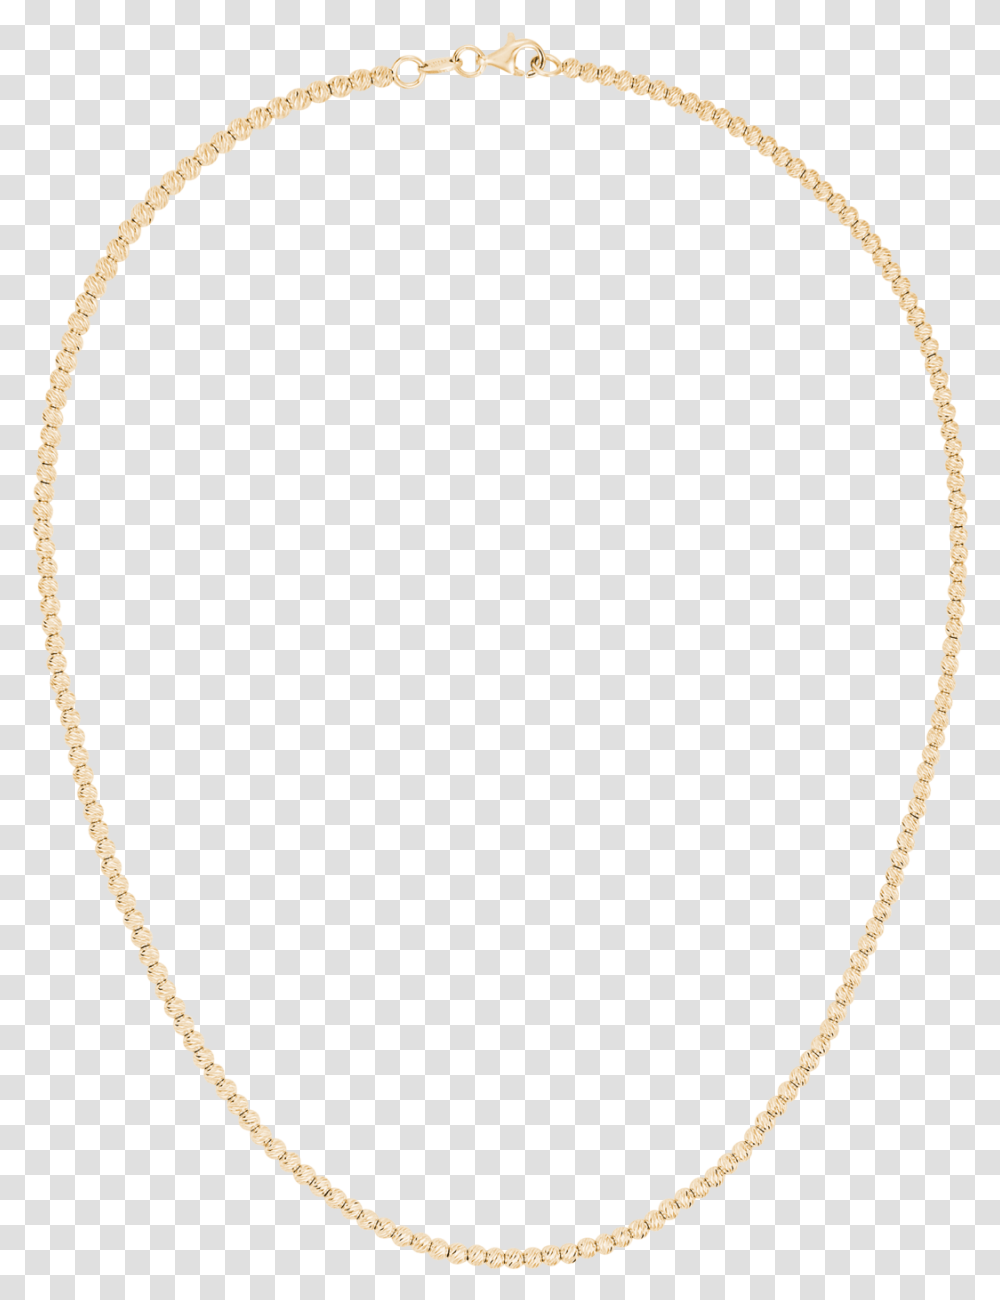 Michael Kors Rose Gold Long Necklace Chain, Jewelry, Accessories, Accessory, Pendant Transparent Png